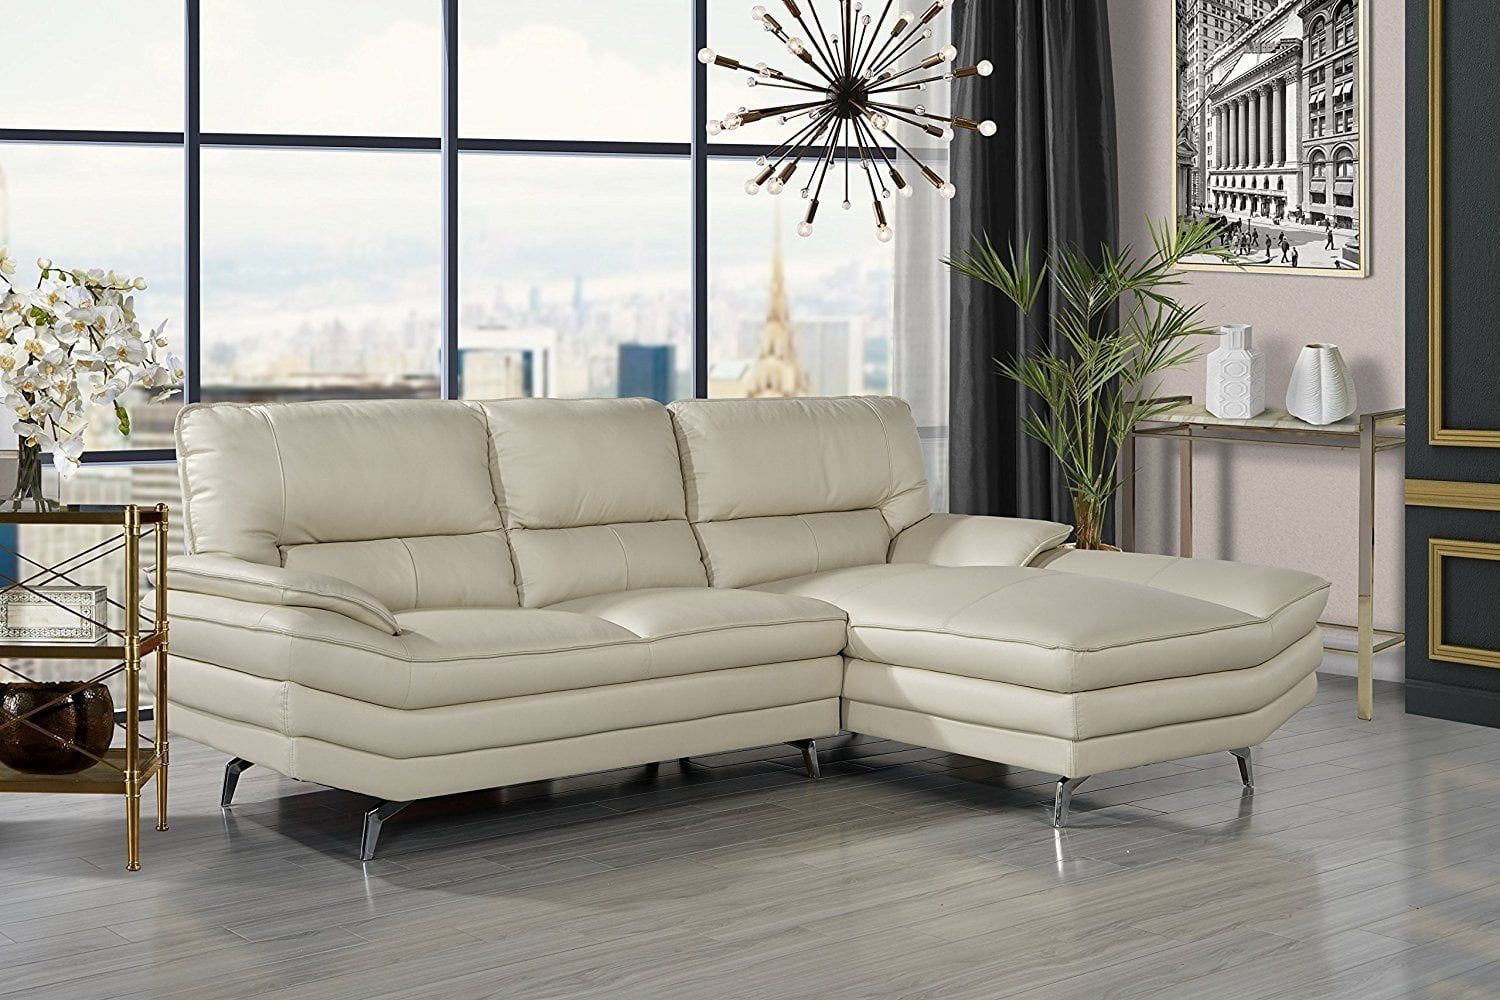 Living Room Leather Sectional Sofa, L Shape Couch With Chaise Lounge For Beige L Shaped Sectional Sofas (Gallery 12 of 20)